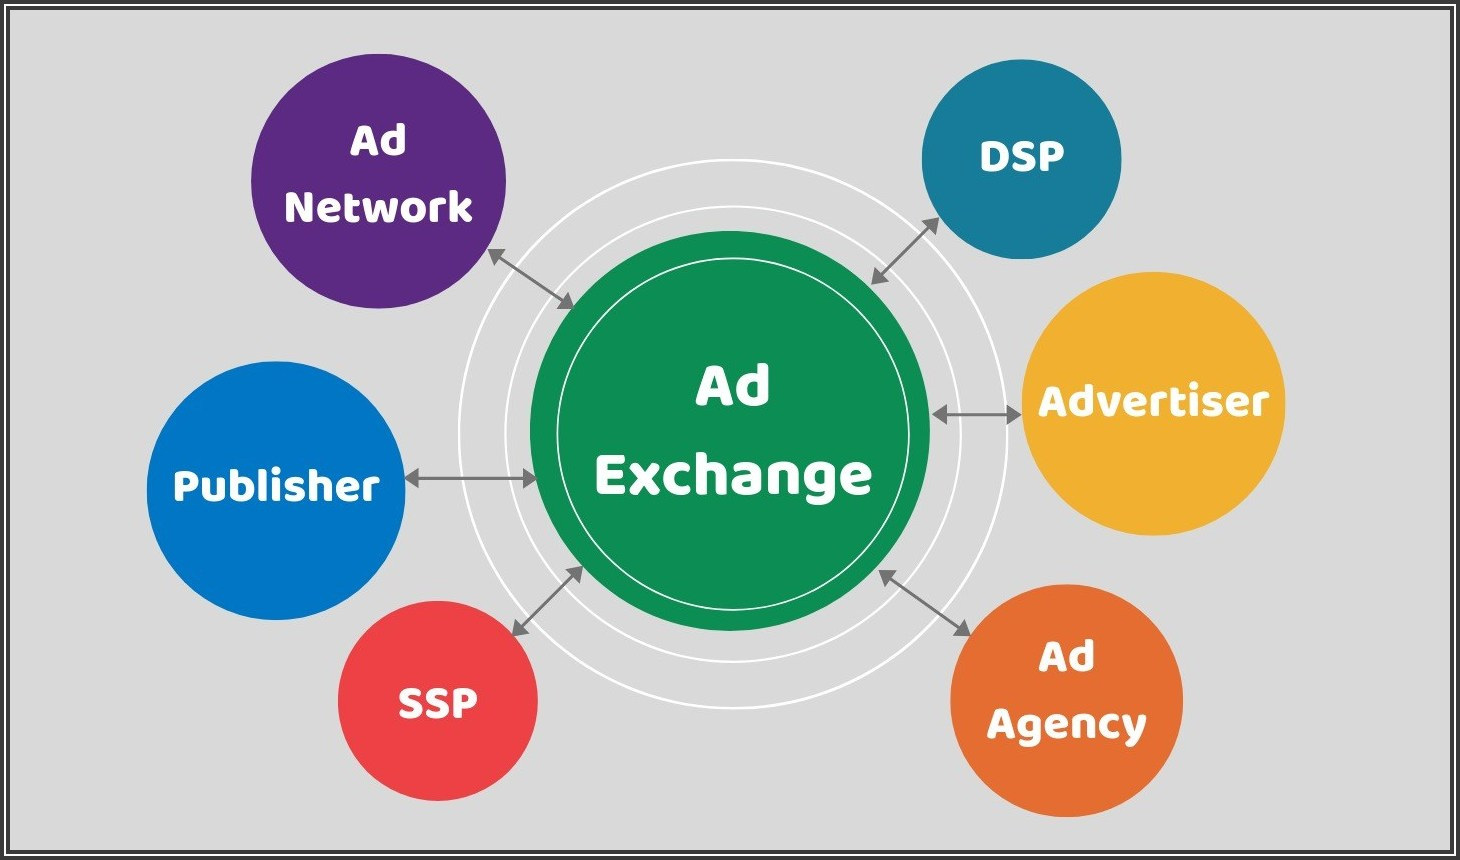 Ad exchanges are used by ad networks, agencies, publisher, advertisers, DSPs and SSPs.